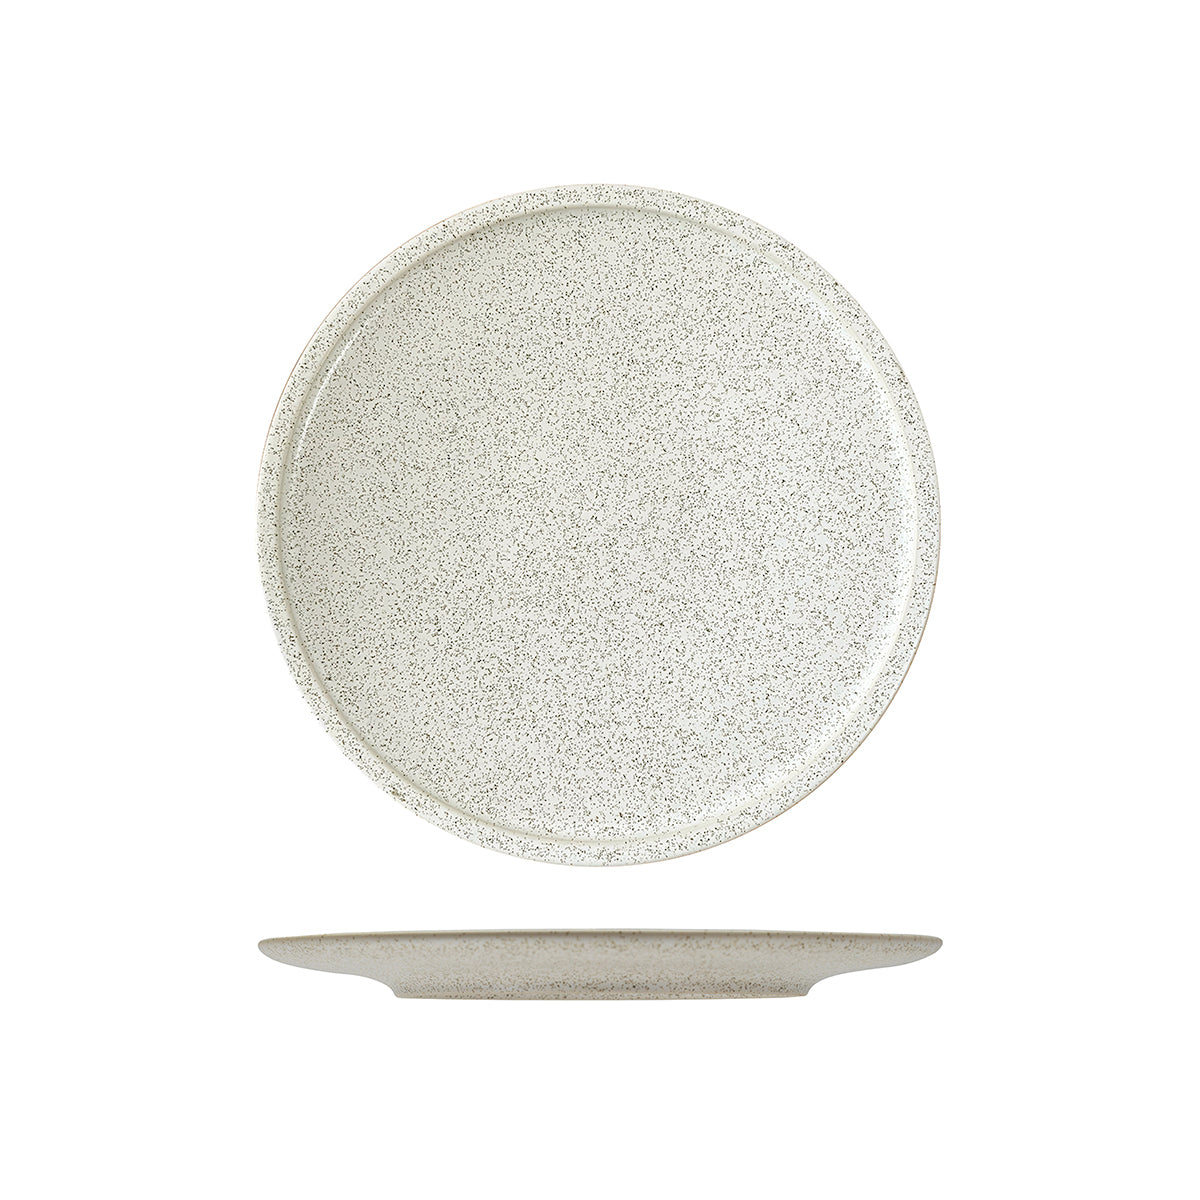 Flat COUPE Plate - 280mm, Ease Clay